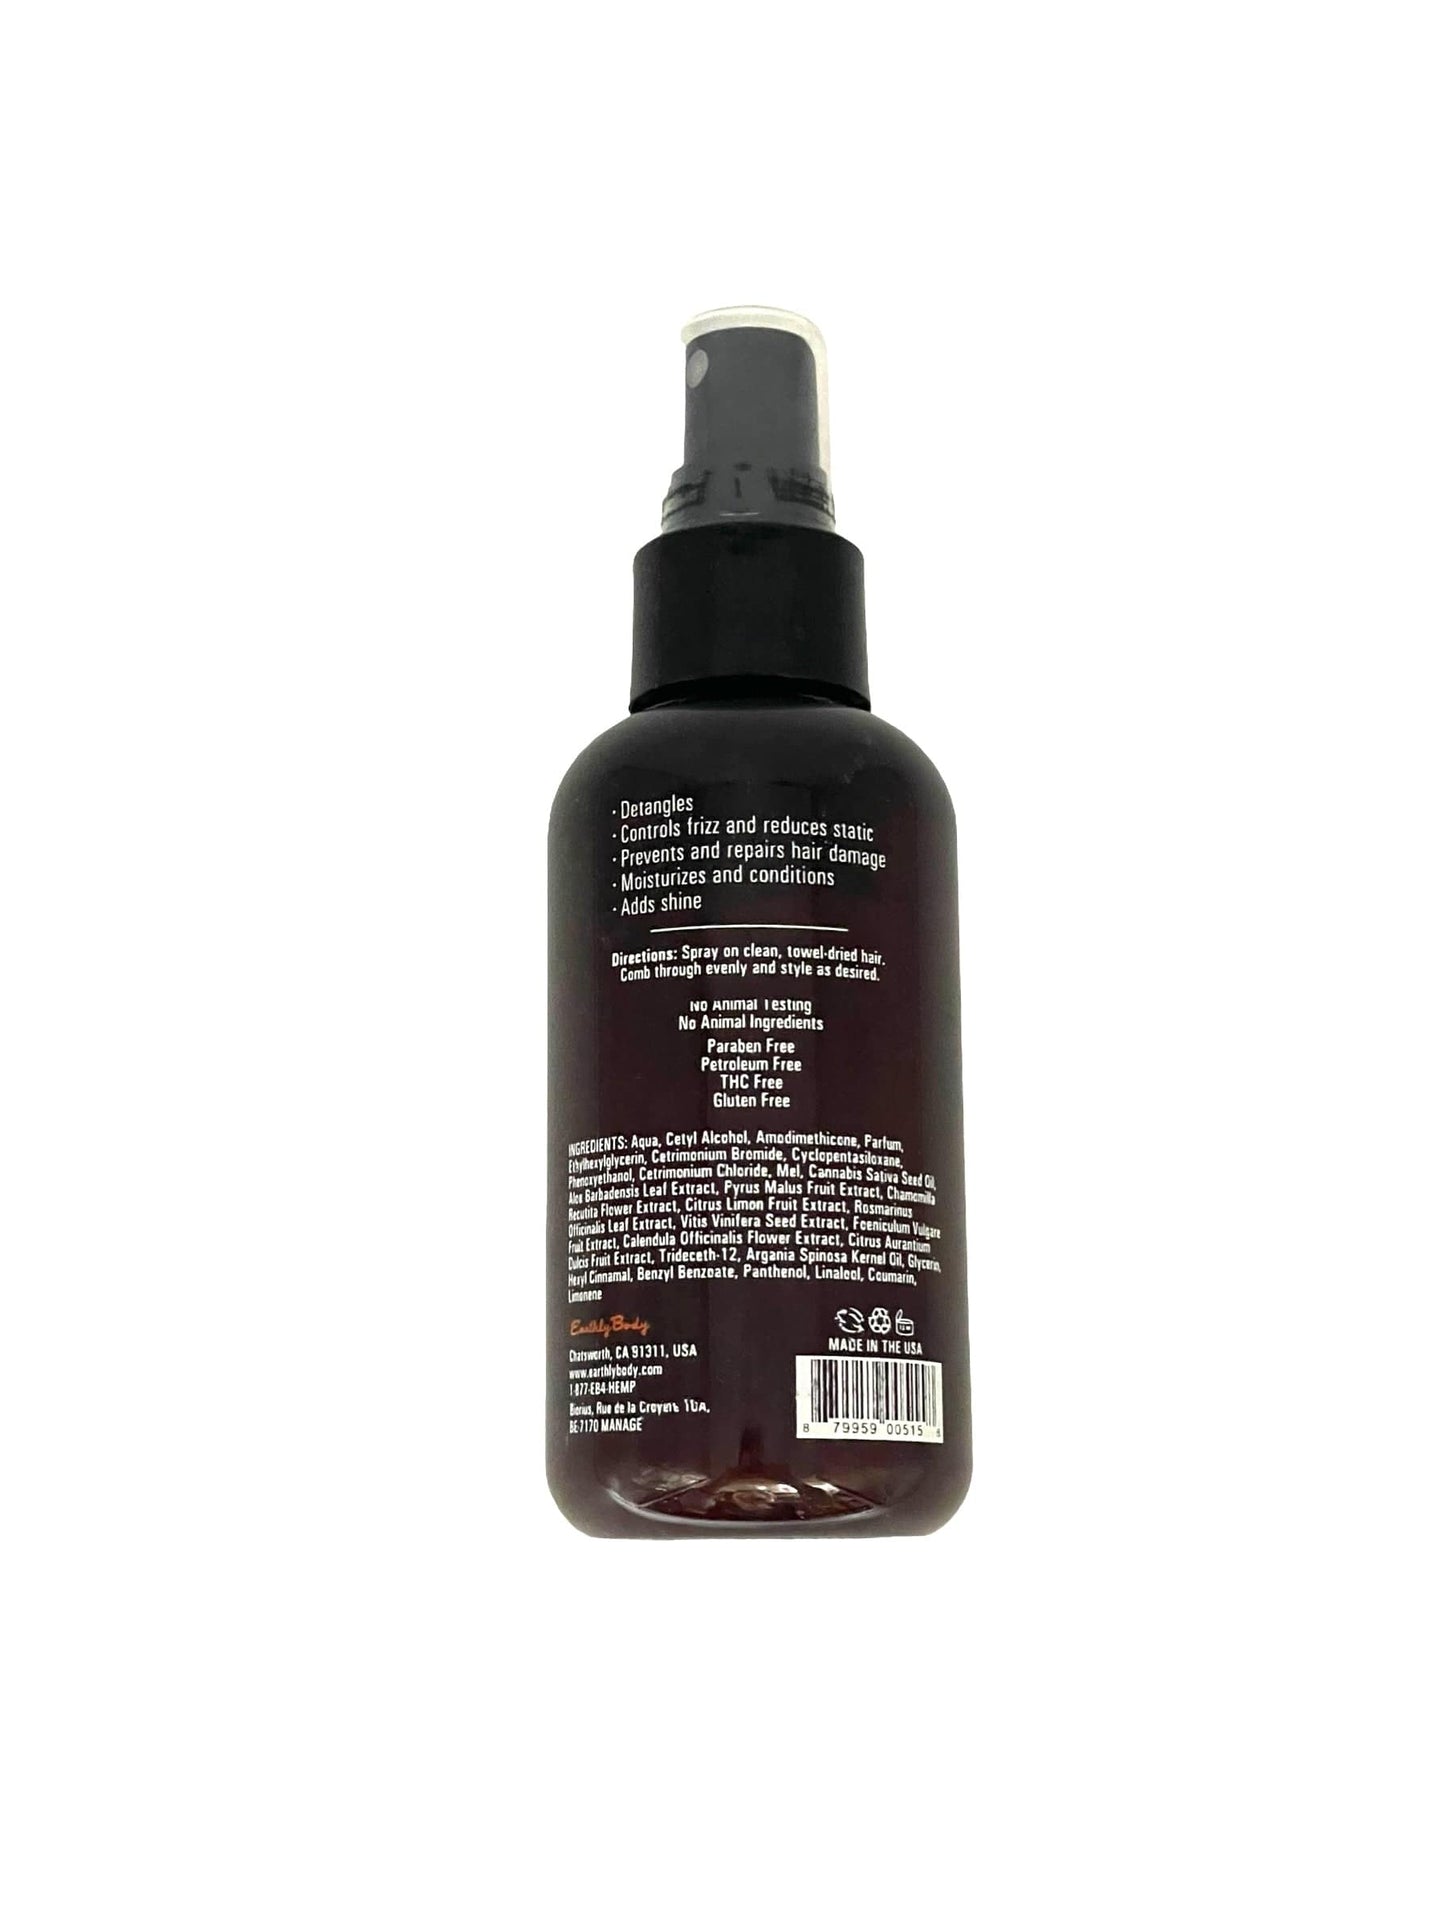 Earthly Body Marrakesh X Original Leave In Treatment 4 oz Hair Styling Products